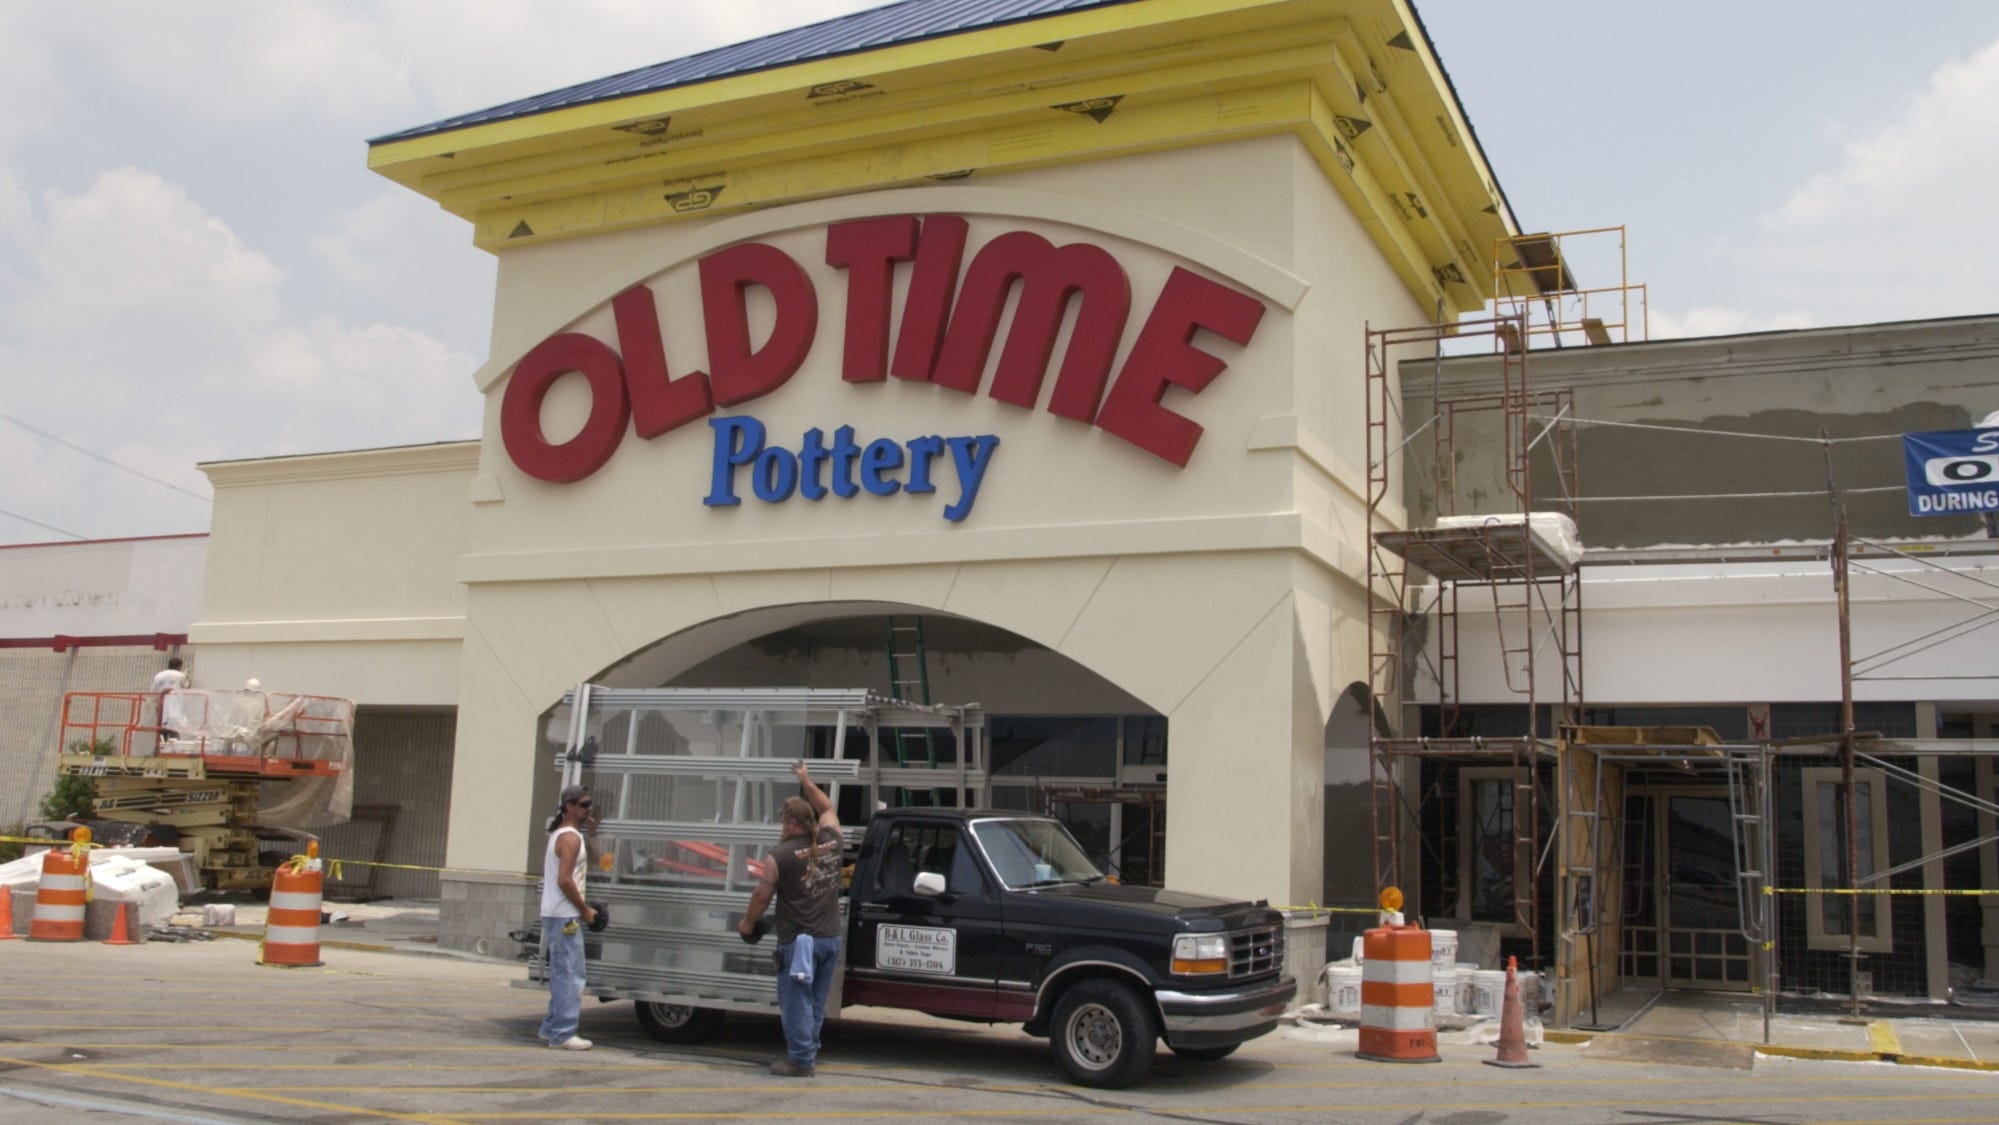 old-time-pottery-to-file-chapter-11-bankruptcy-close-stores-due-to-covid-19